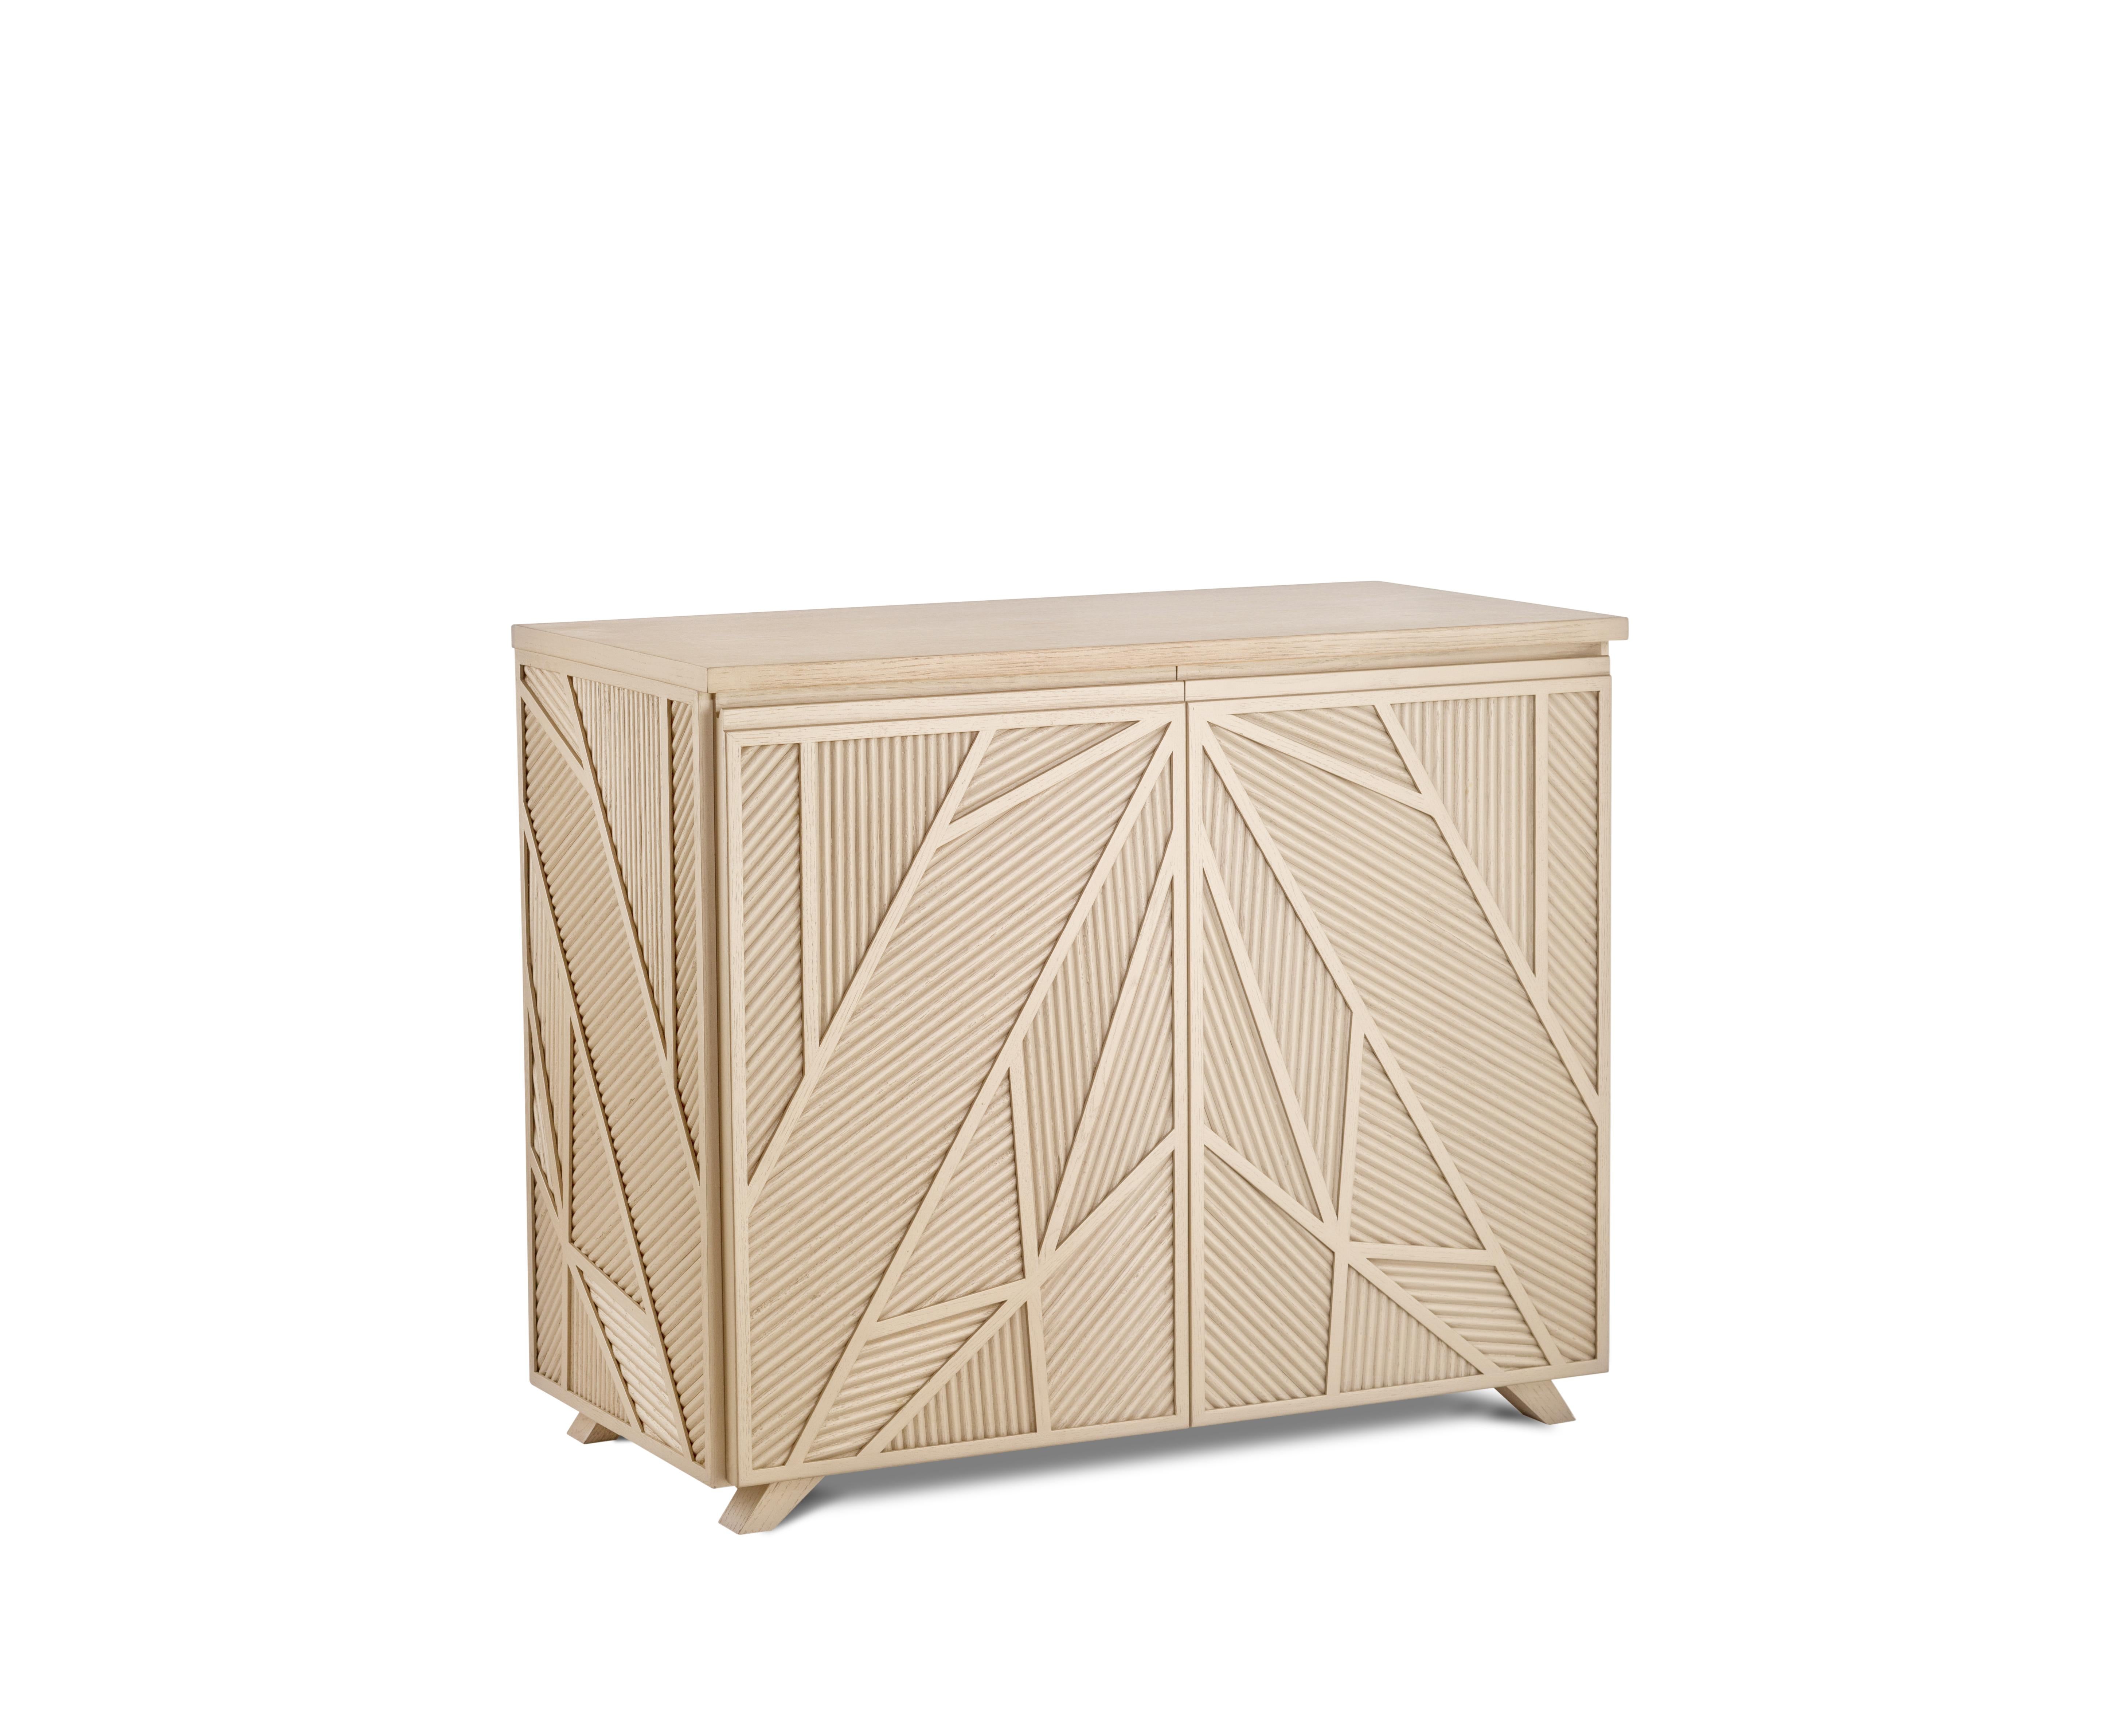 Stained Geometric Oak Sticks Cabinet Inspired from Ancient Egypt Use of Palm Branches